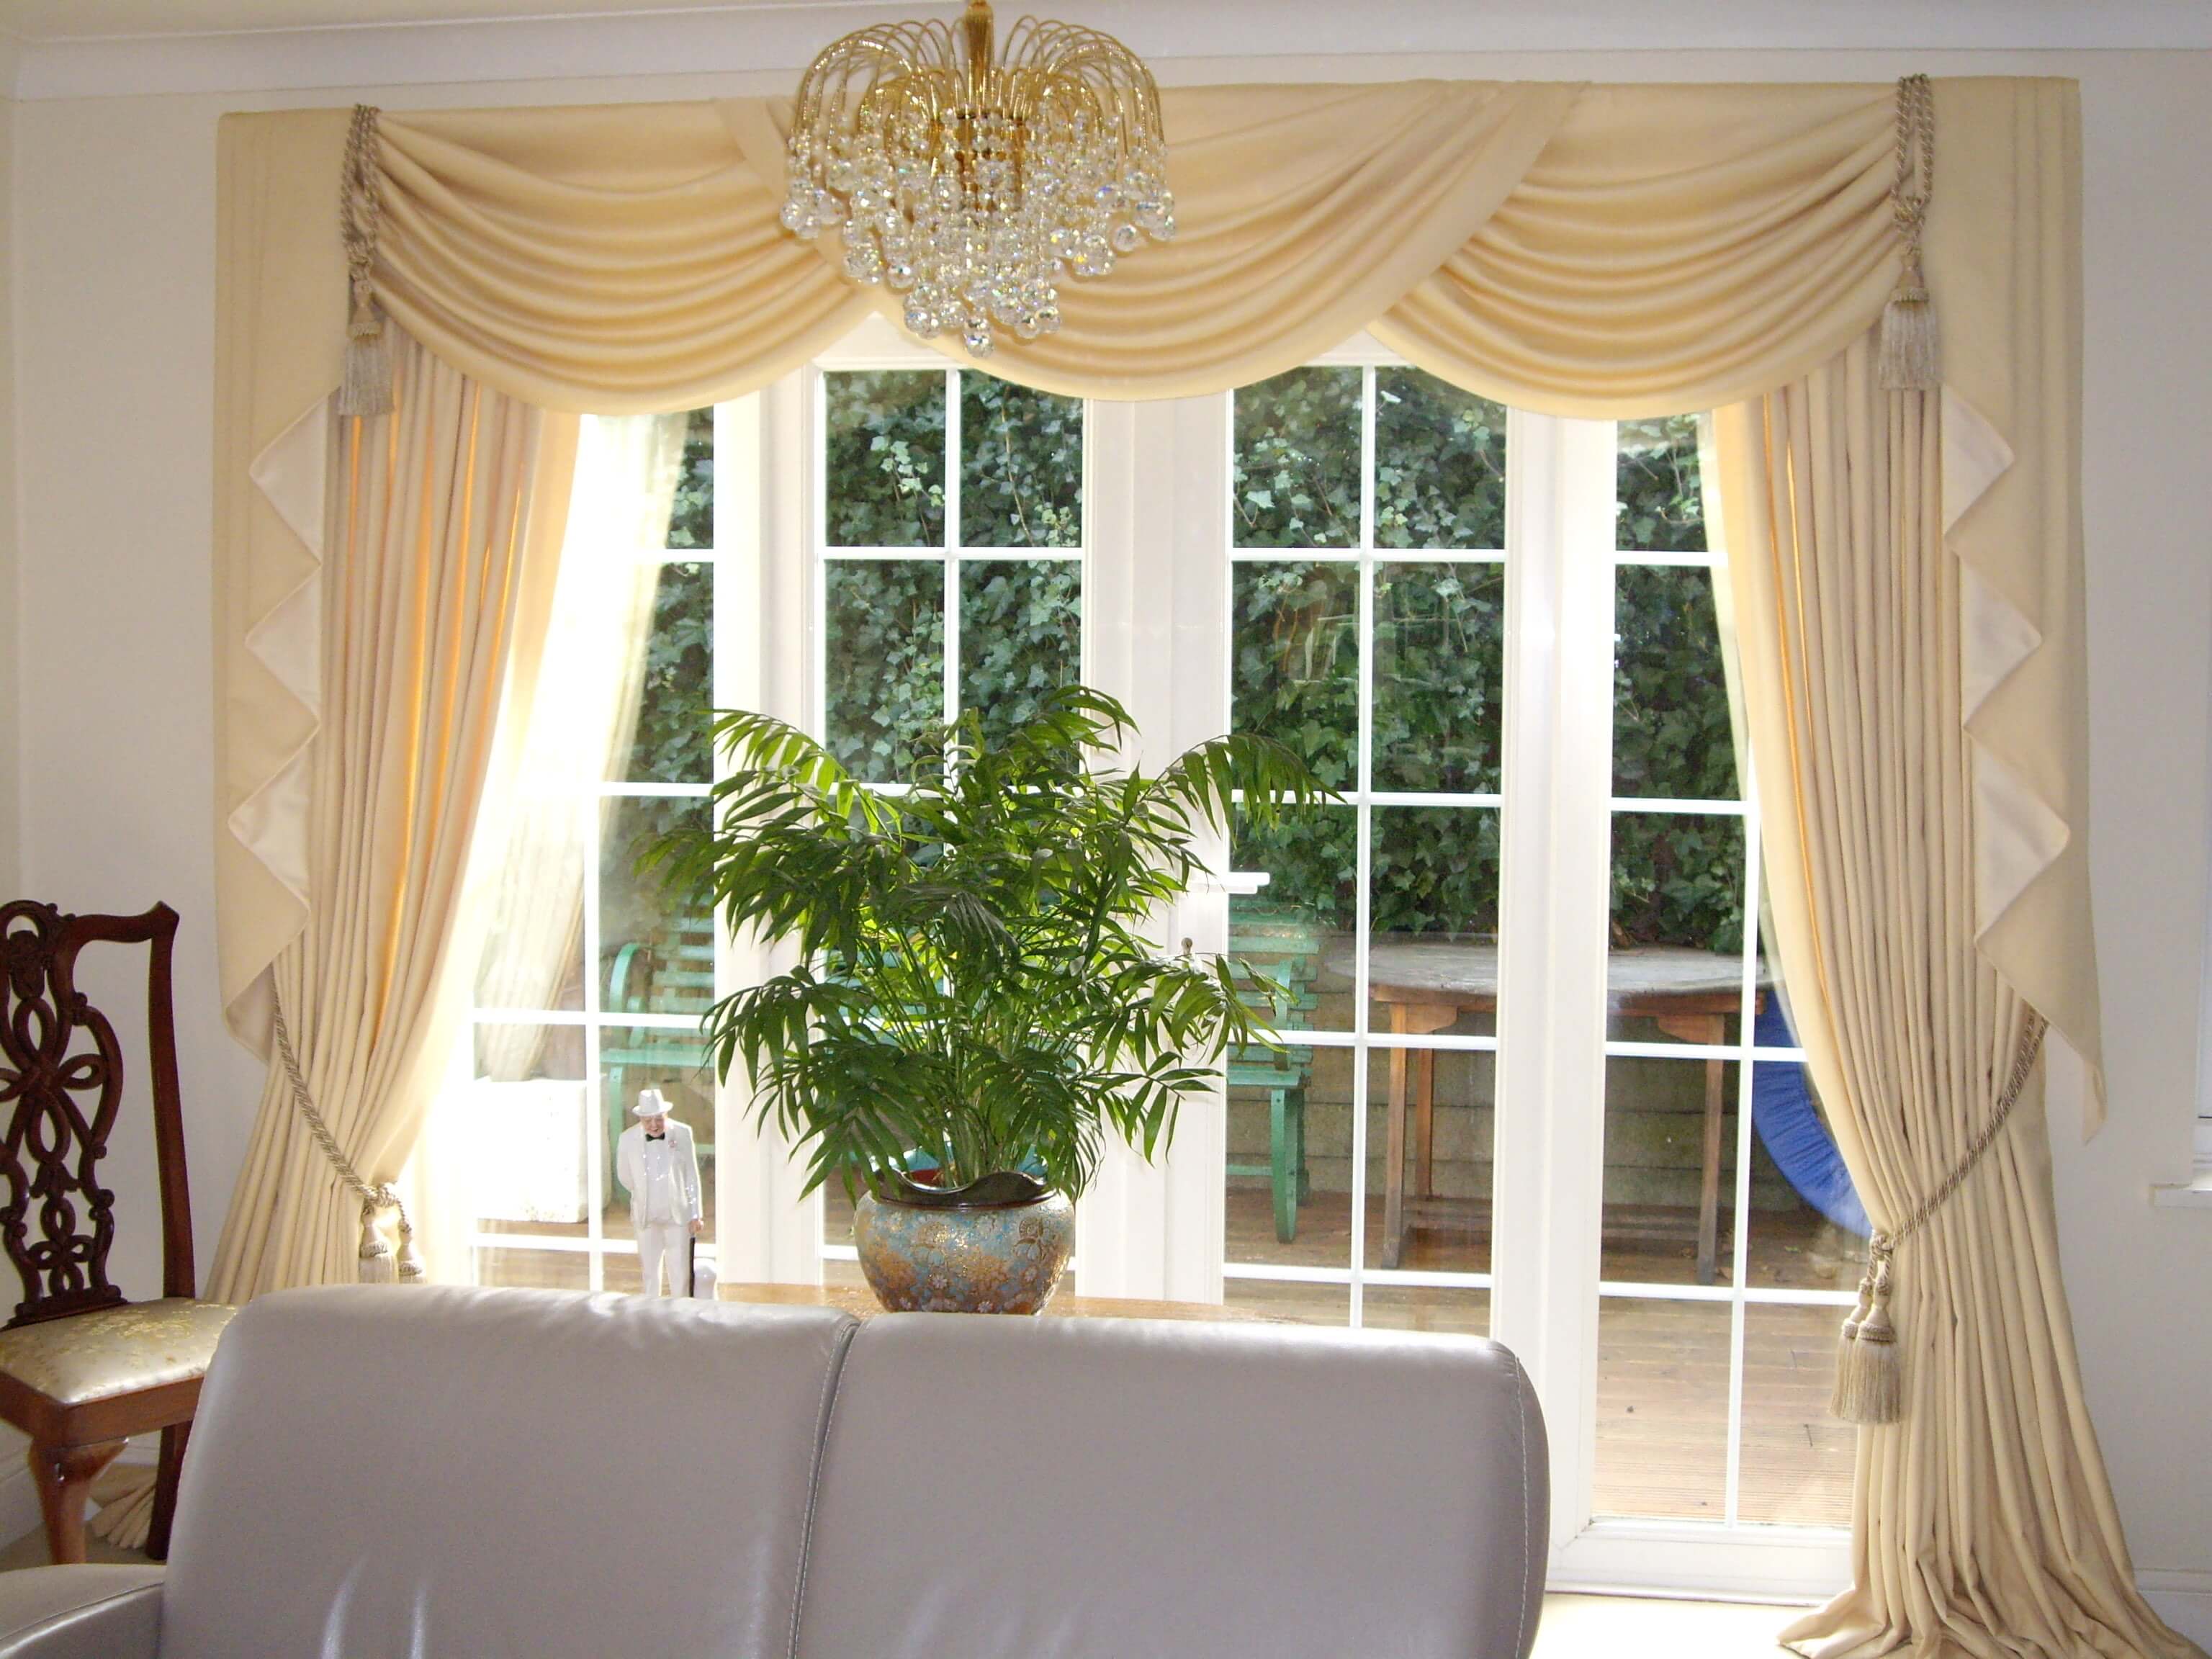 Cream curtains with swags and tiebacks